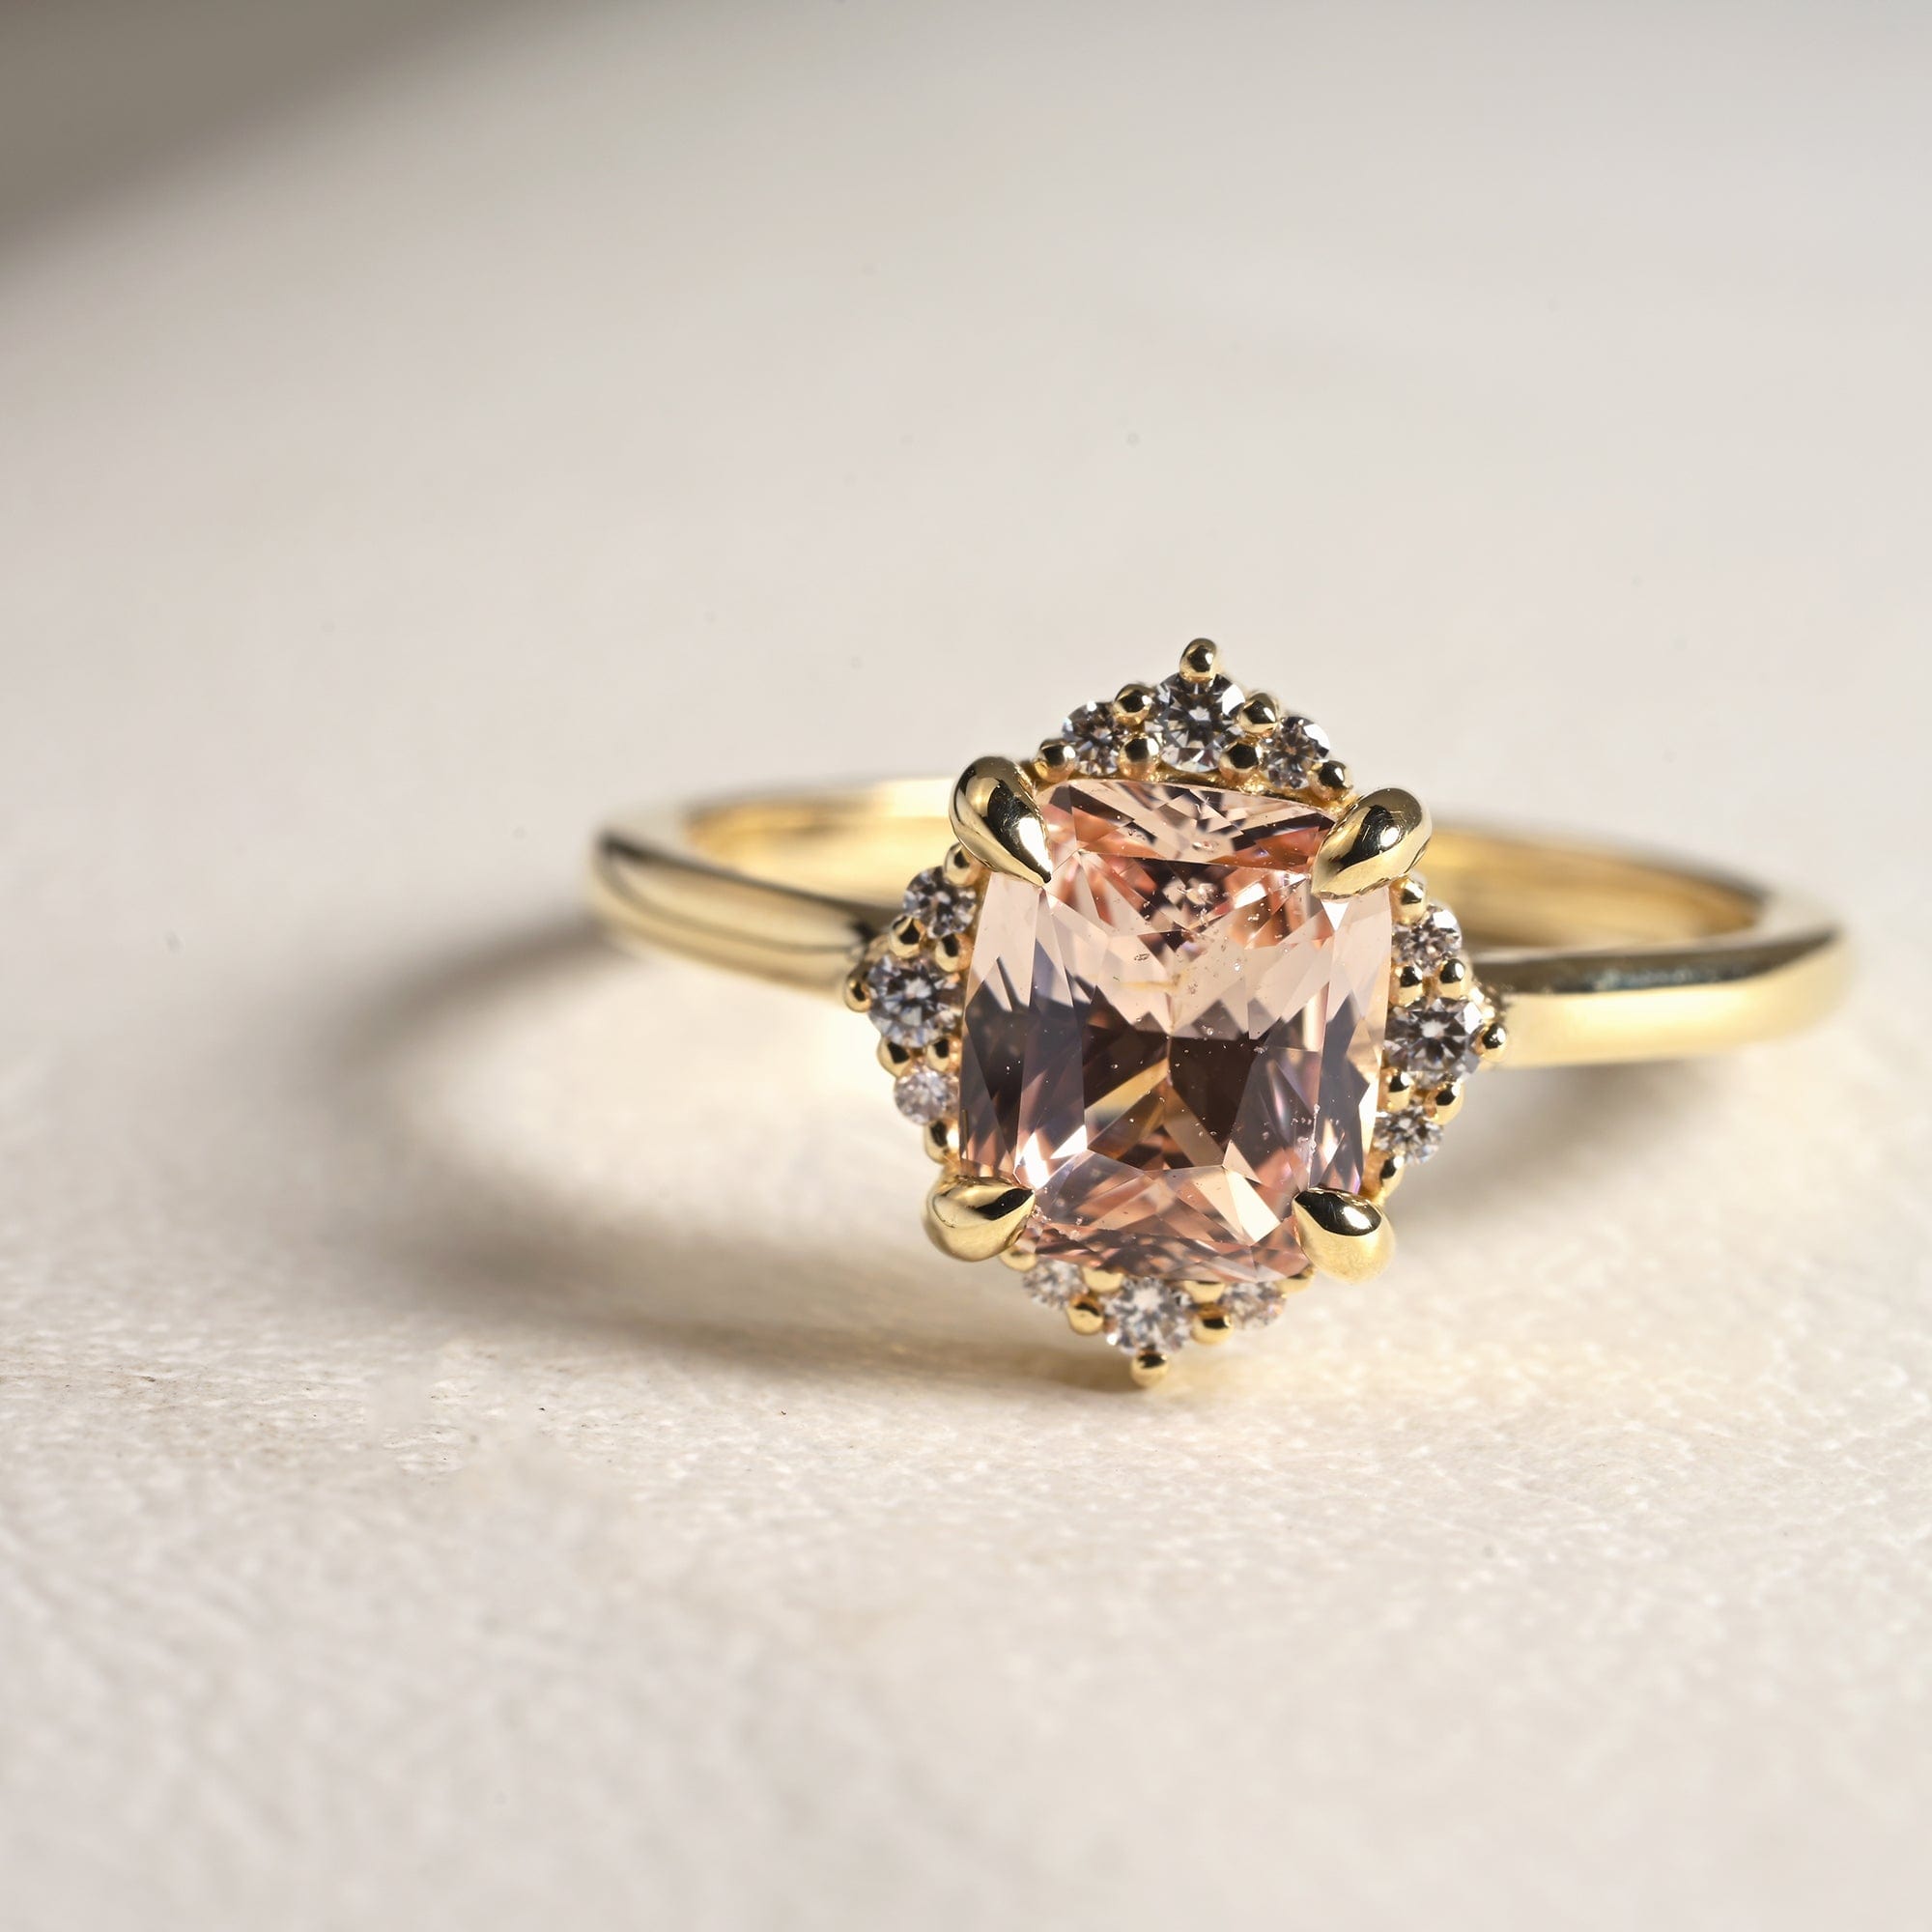 14k yellow gold halo engagement ring with peach cushion cut sapphire